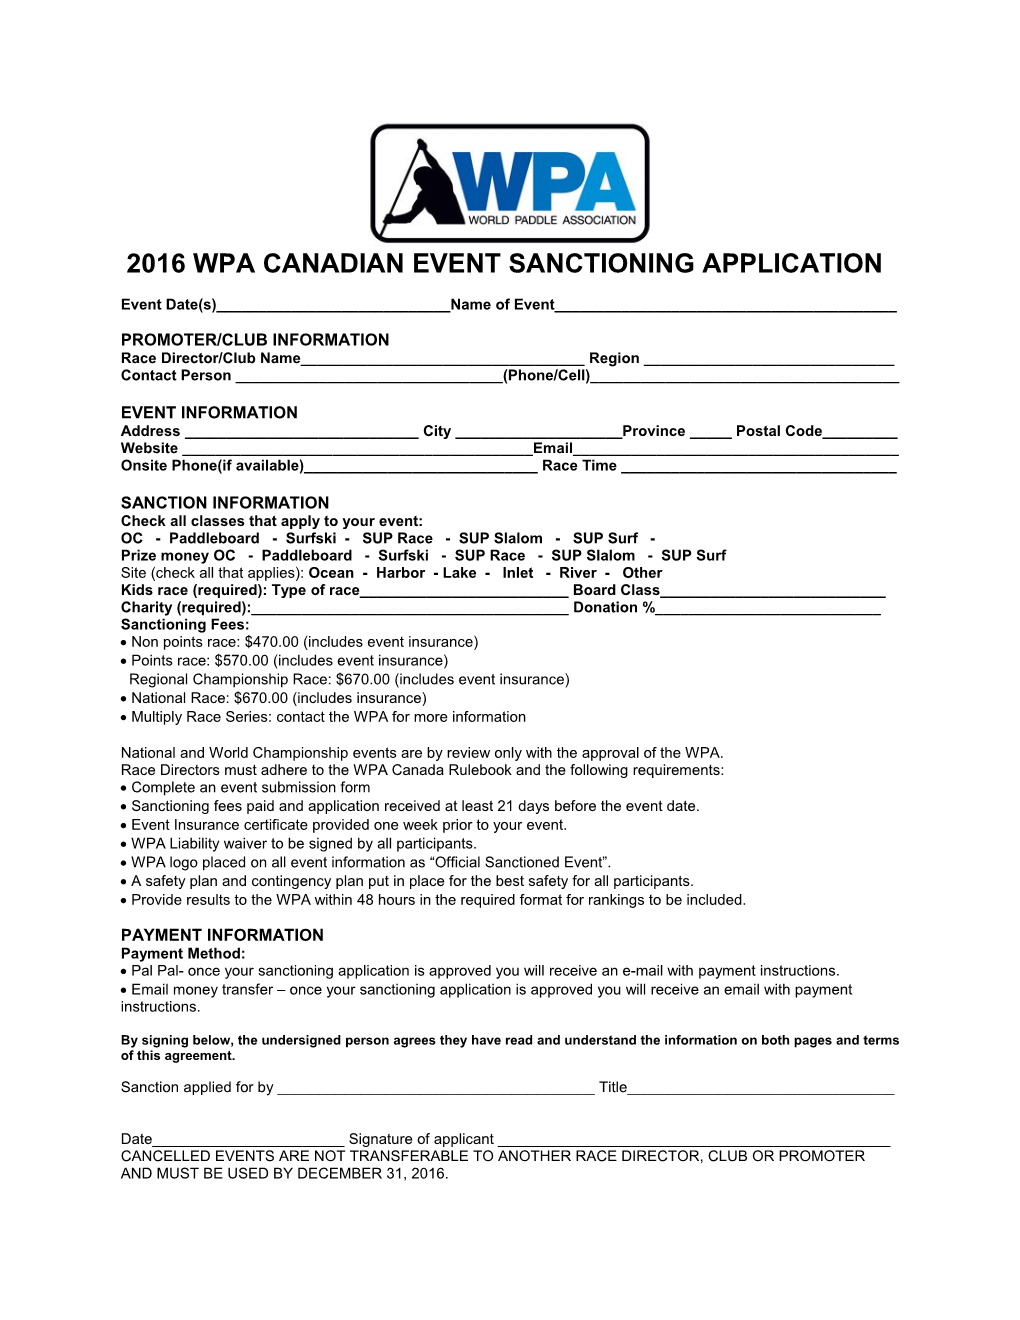 2016 Wpa Canadian Event Sanctioning Application